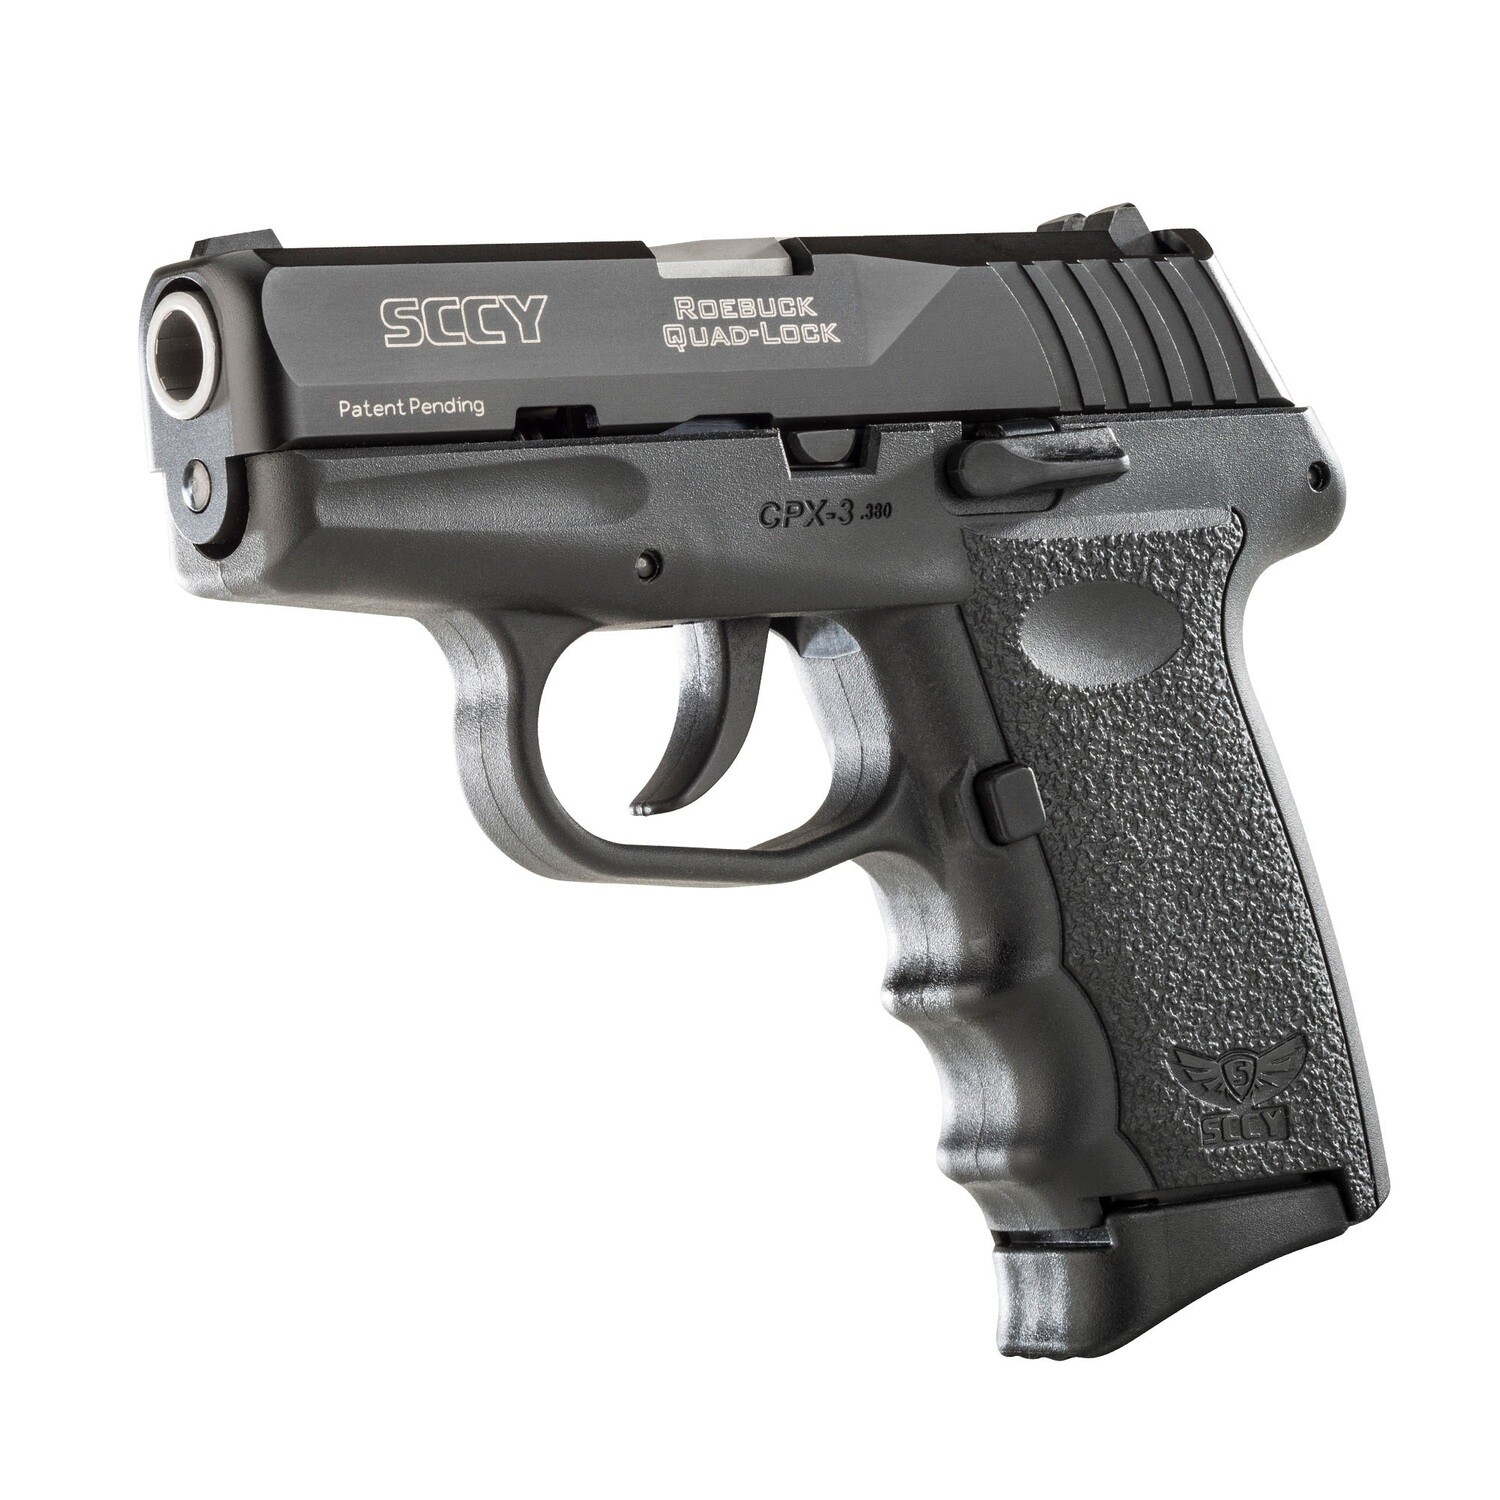 SCCY Industries Cpx-3 380acp Blk/black 10+1